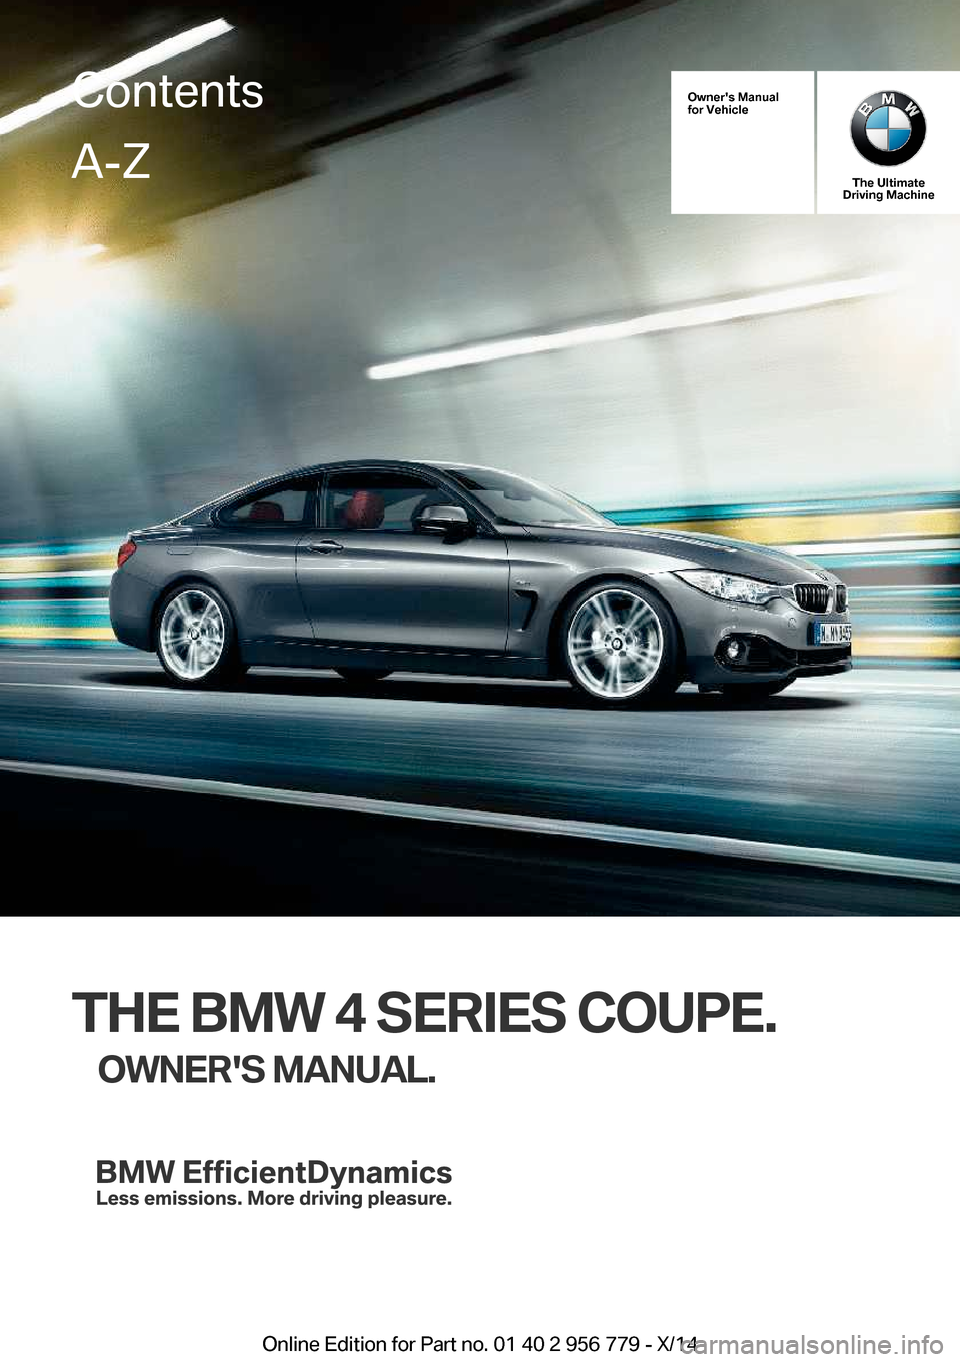 BMW 4 SERIES COUPE 2014 F32 Owners Manual Owners Manual
for Vehicle
The Ultimate
Driving Machine
THE BMW 4 SERIES COUPE.
OWNERS MANUAL.
ContentsA-Z
Online Edition for Part no. 01 40 2 956 779 - X/14   